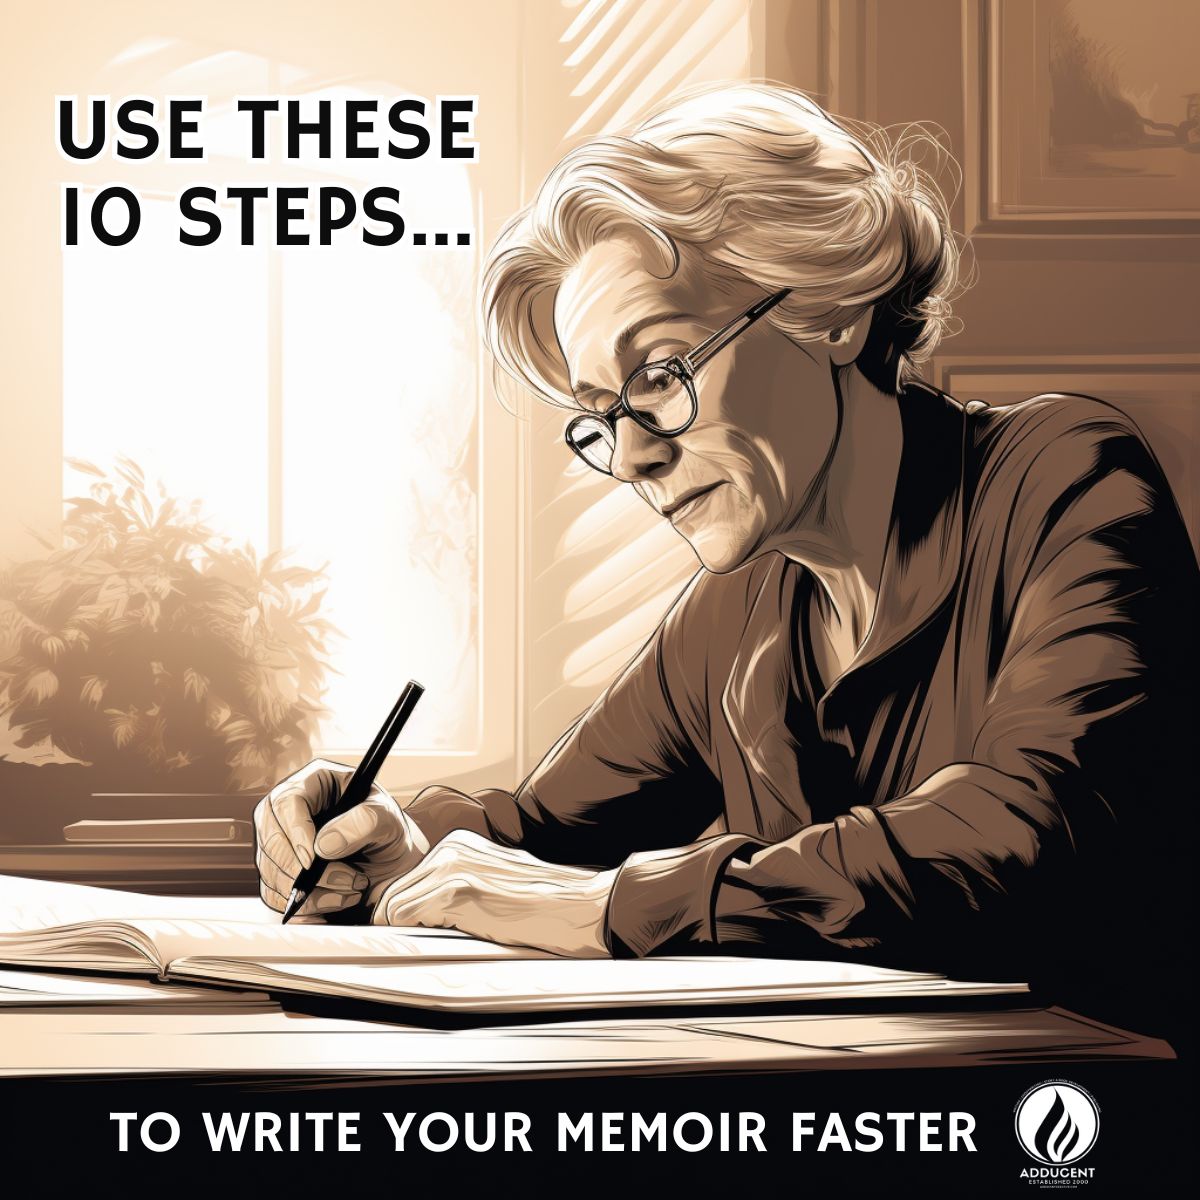 USE THESE TEN STEPS TO WRITE YOUR MEMOIR FASTER -- AdducentCreative.com